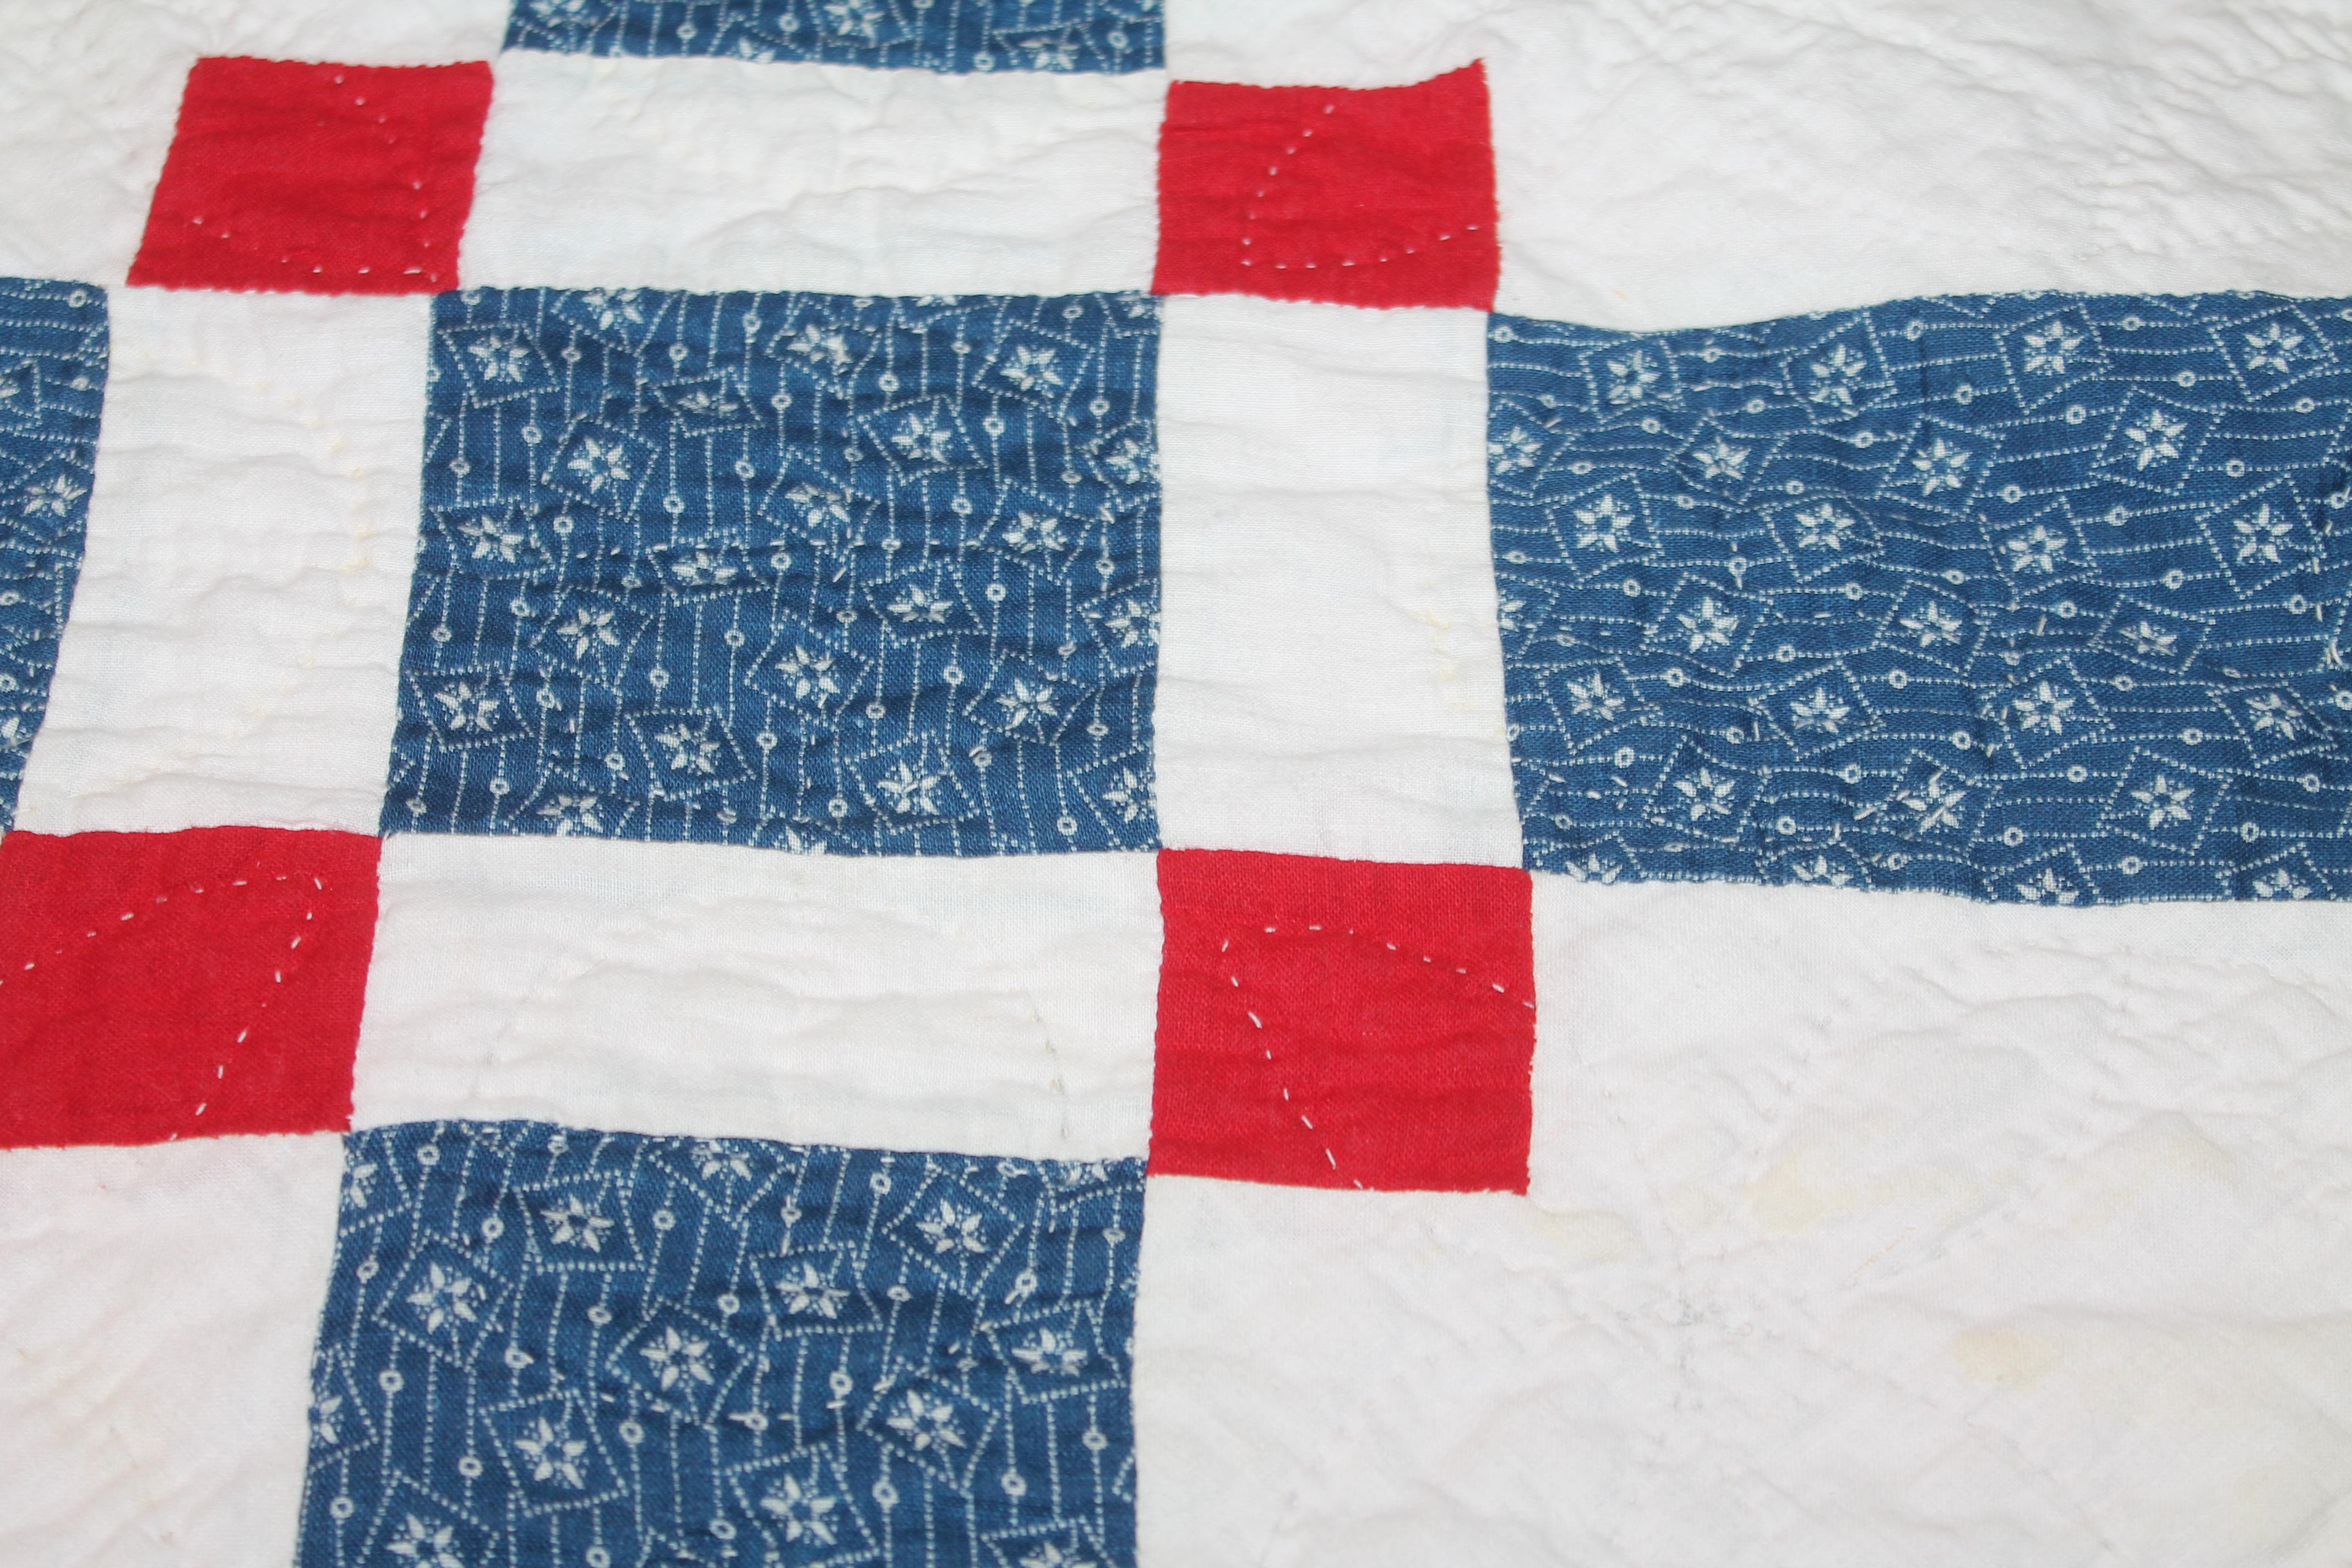 Hand-Crafted Patriotic Nine Patch Variation Quilt